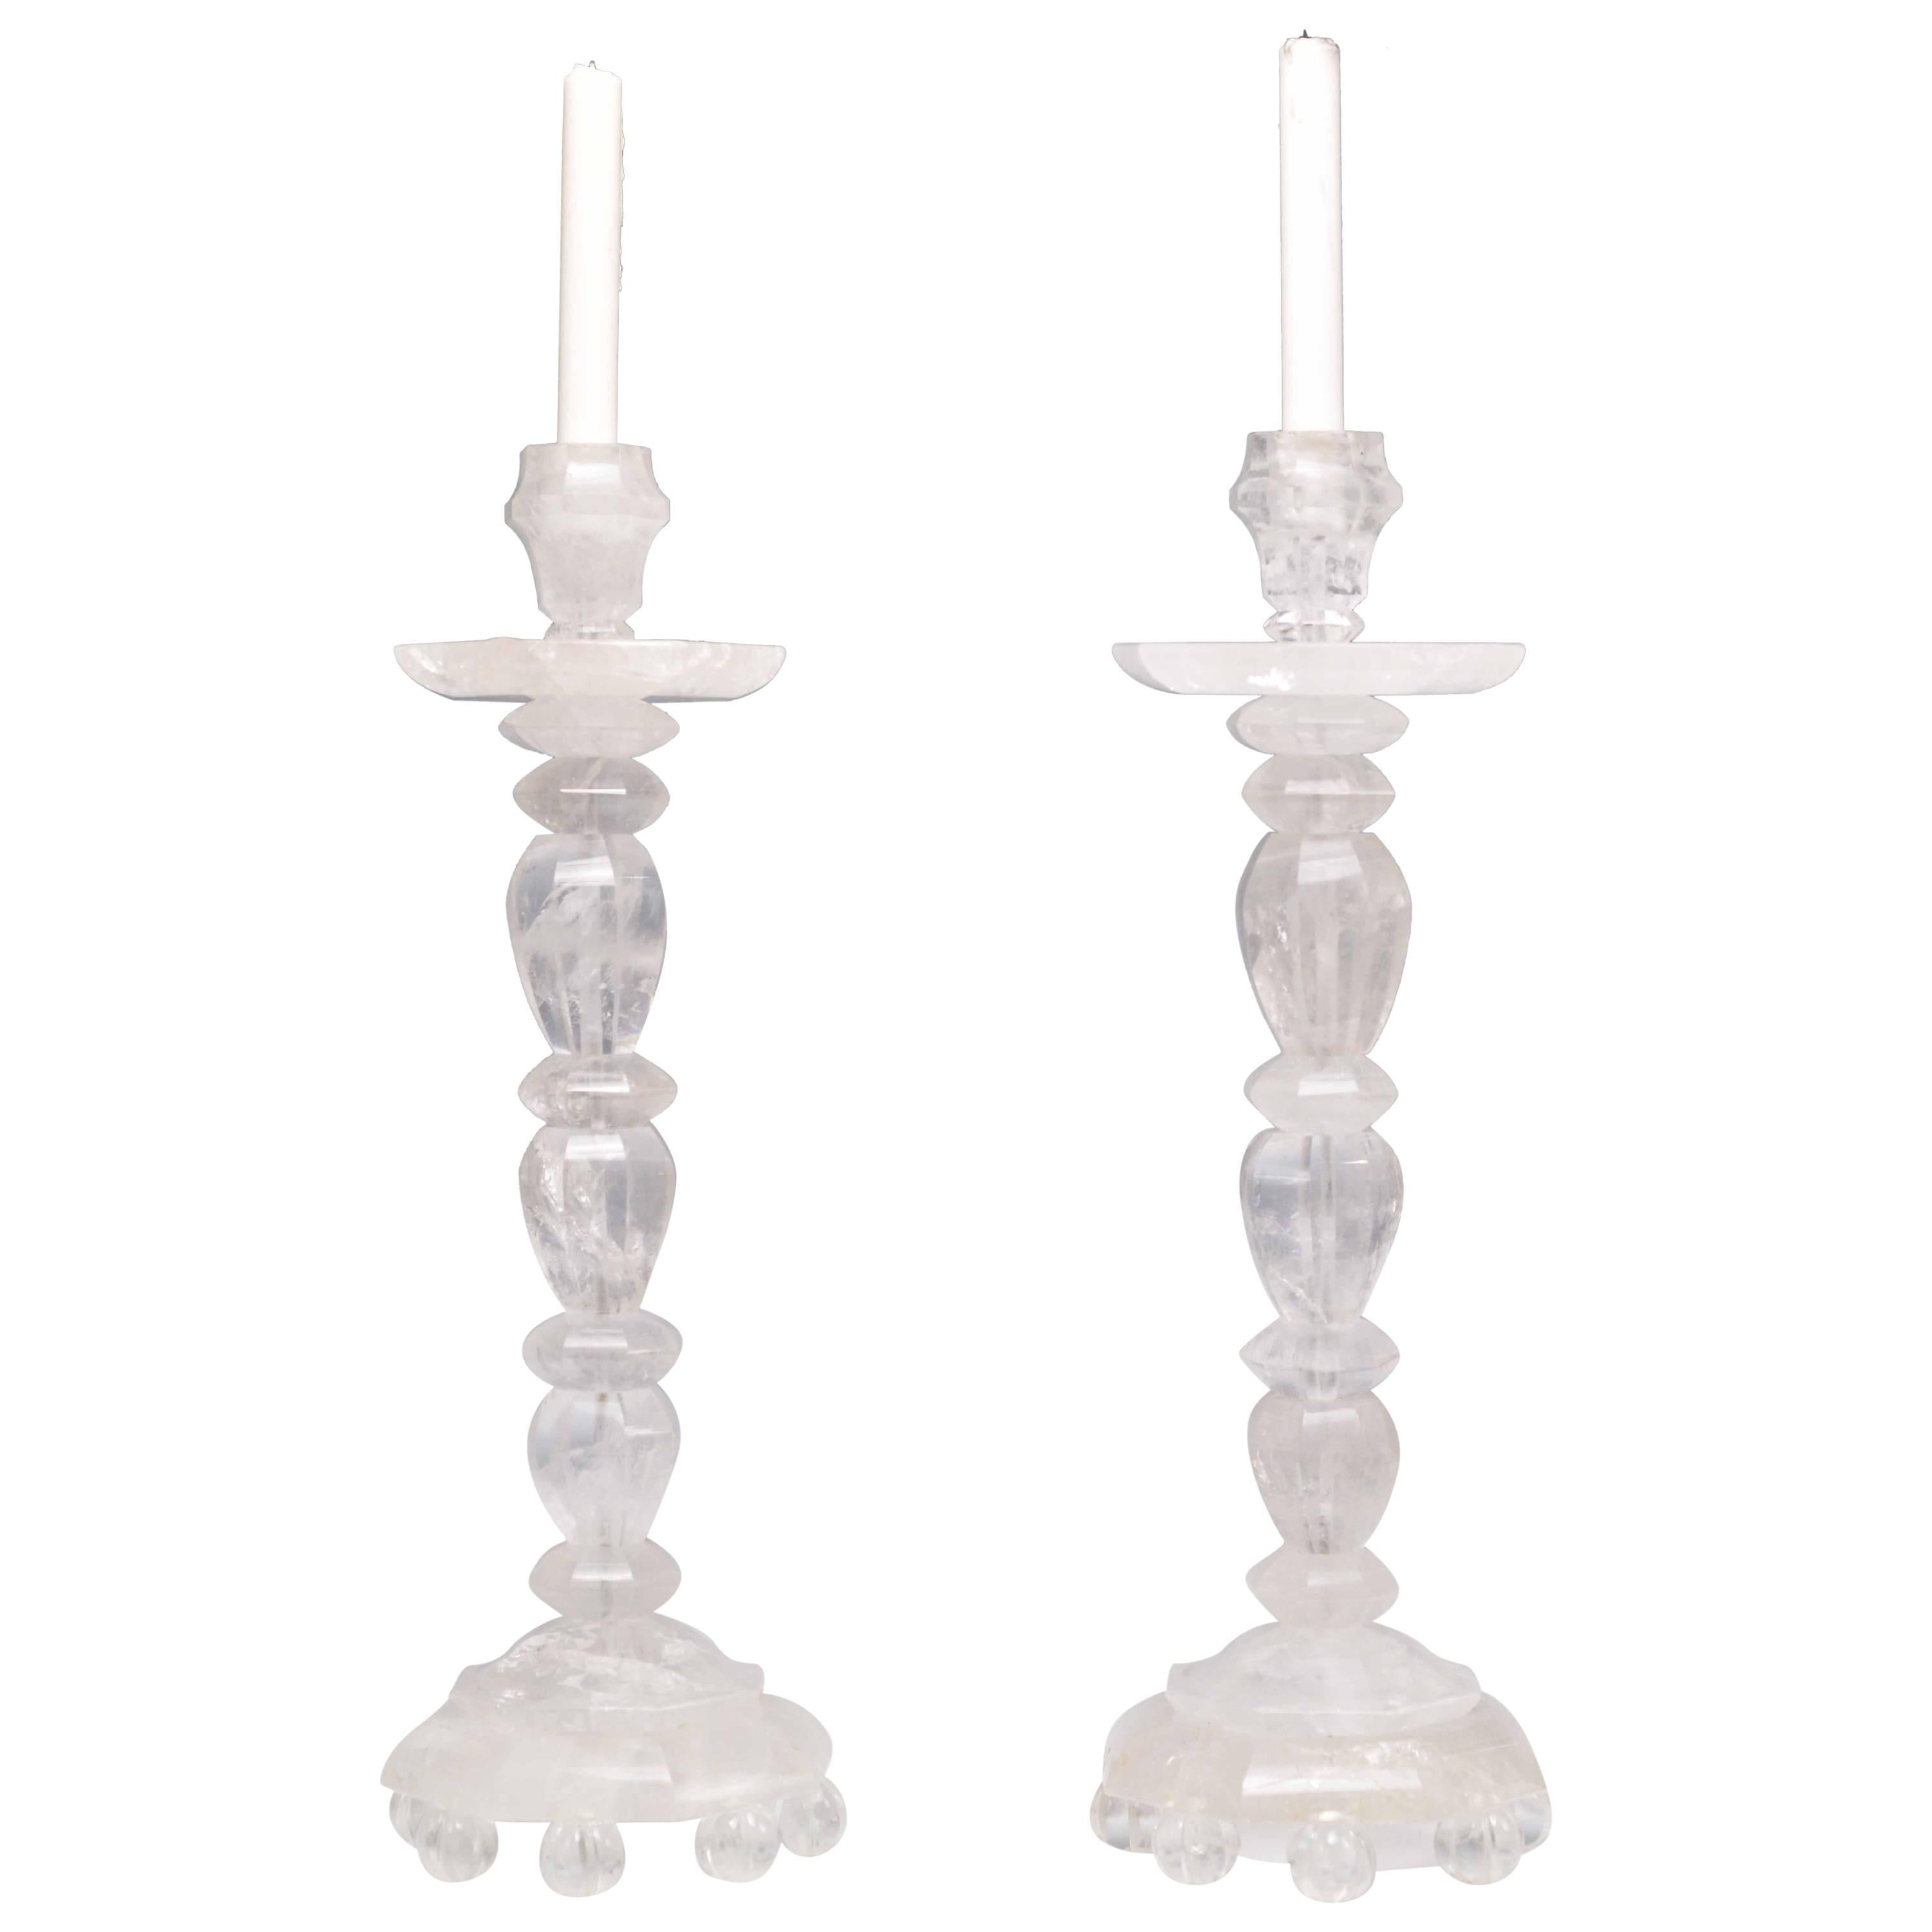 Elegant fine carved rock crystal candlesticks.
  
For more Rock Crystal lightings and accessories from Phoenix gallery, please search 